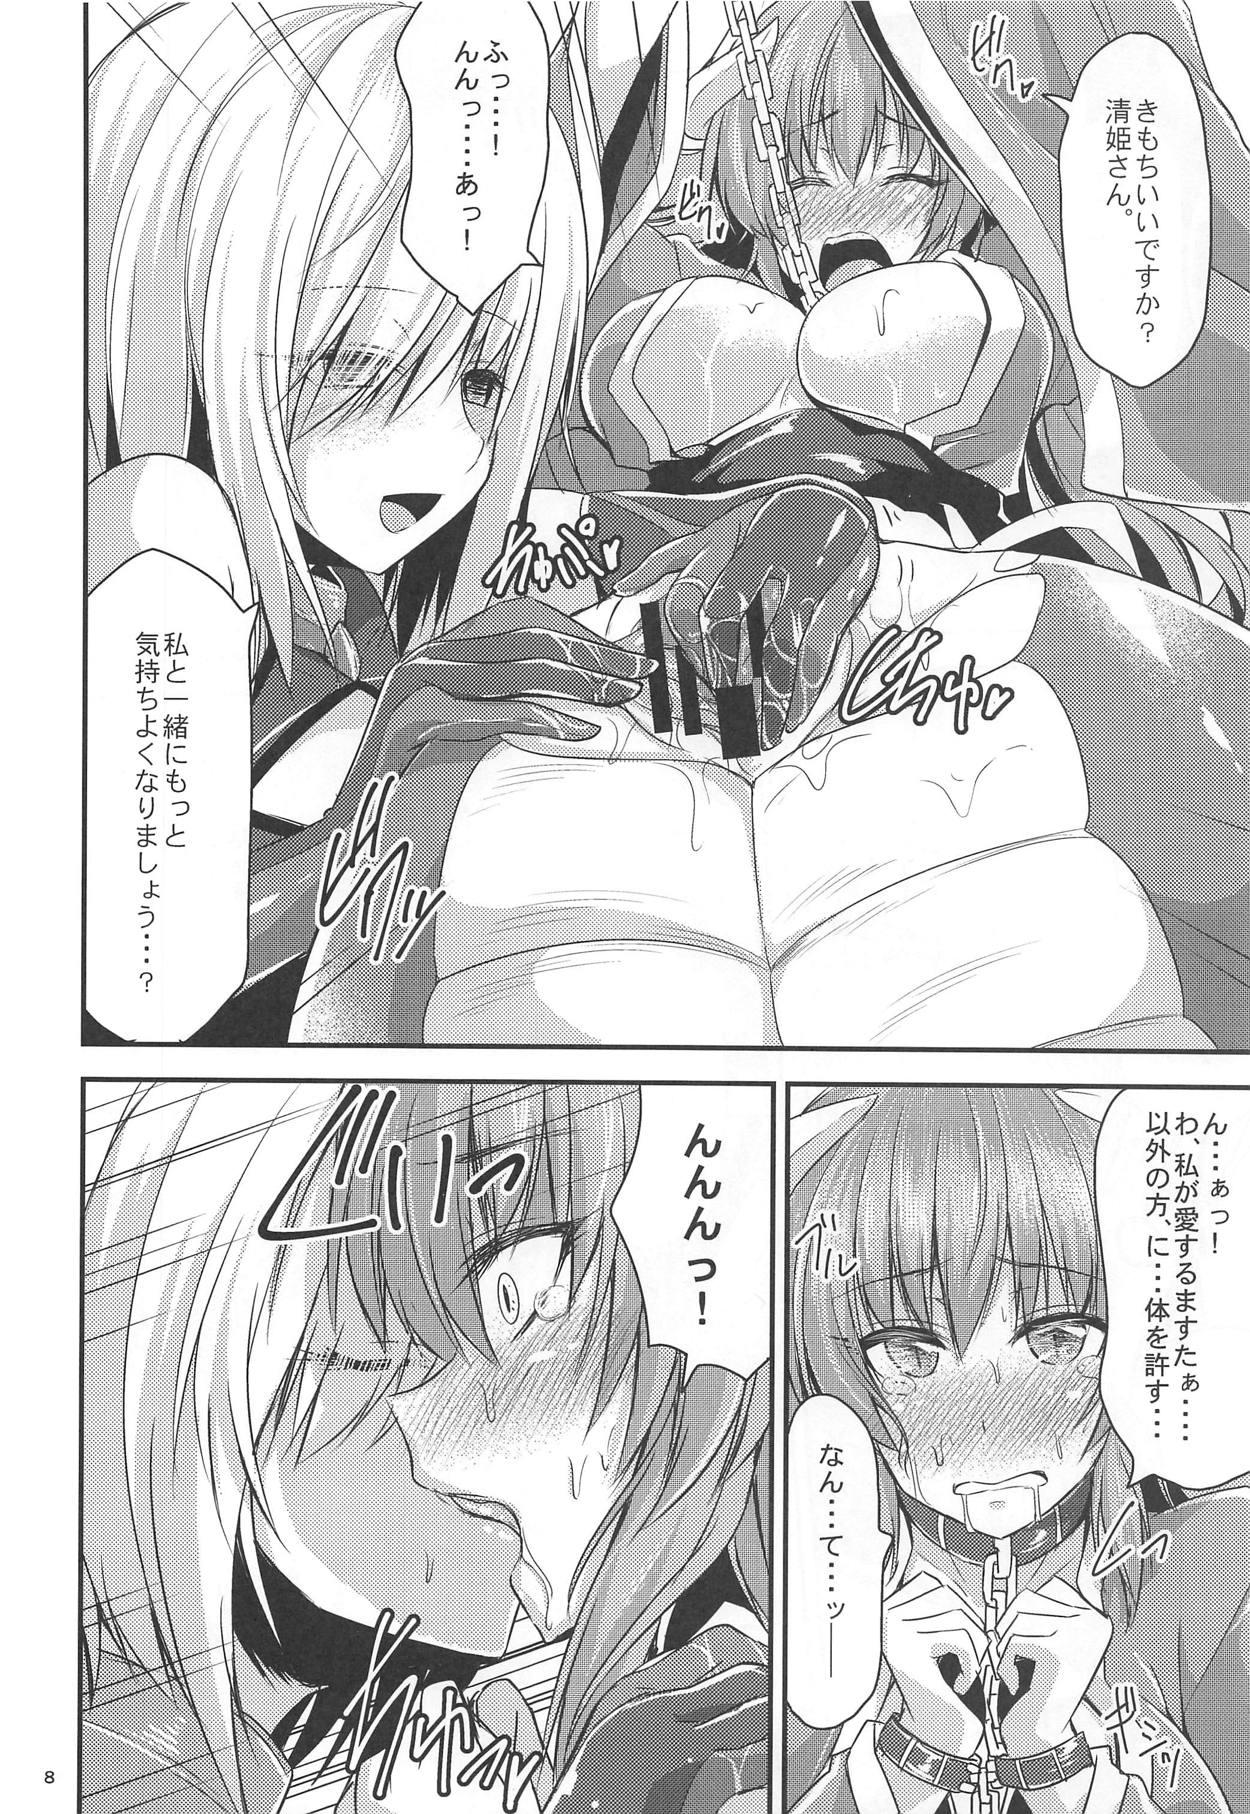 Fuck Porn Jingai Ero β - Touhou project The idolmaster Fate grand order Glamour Porn - Page 7